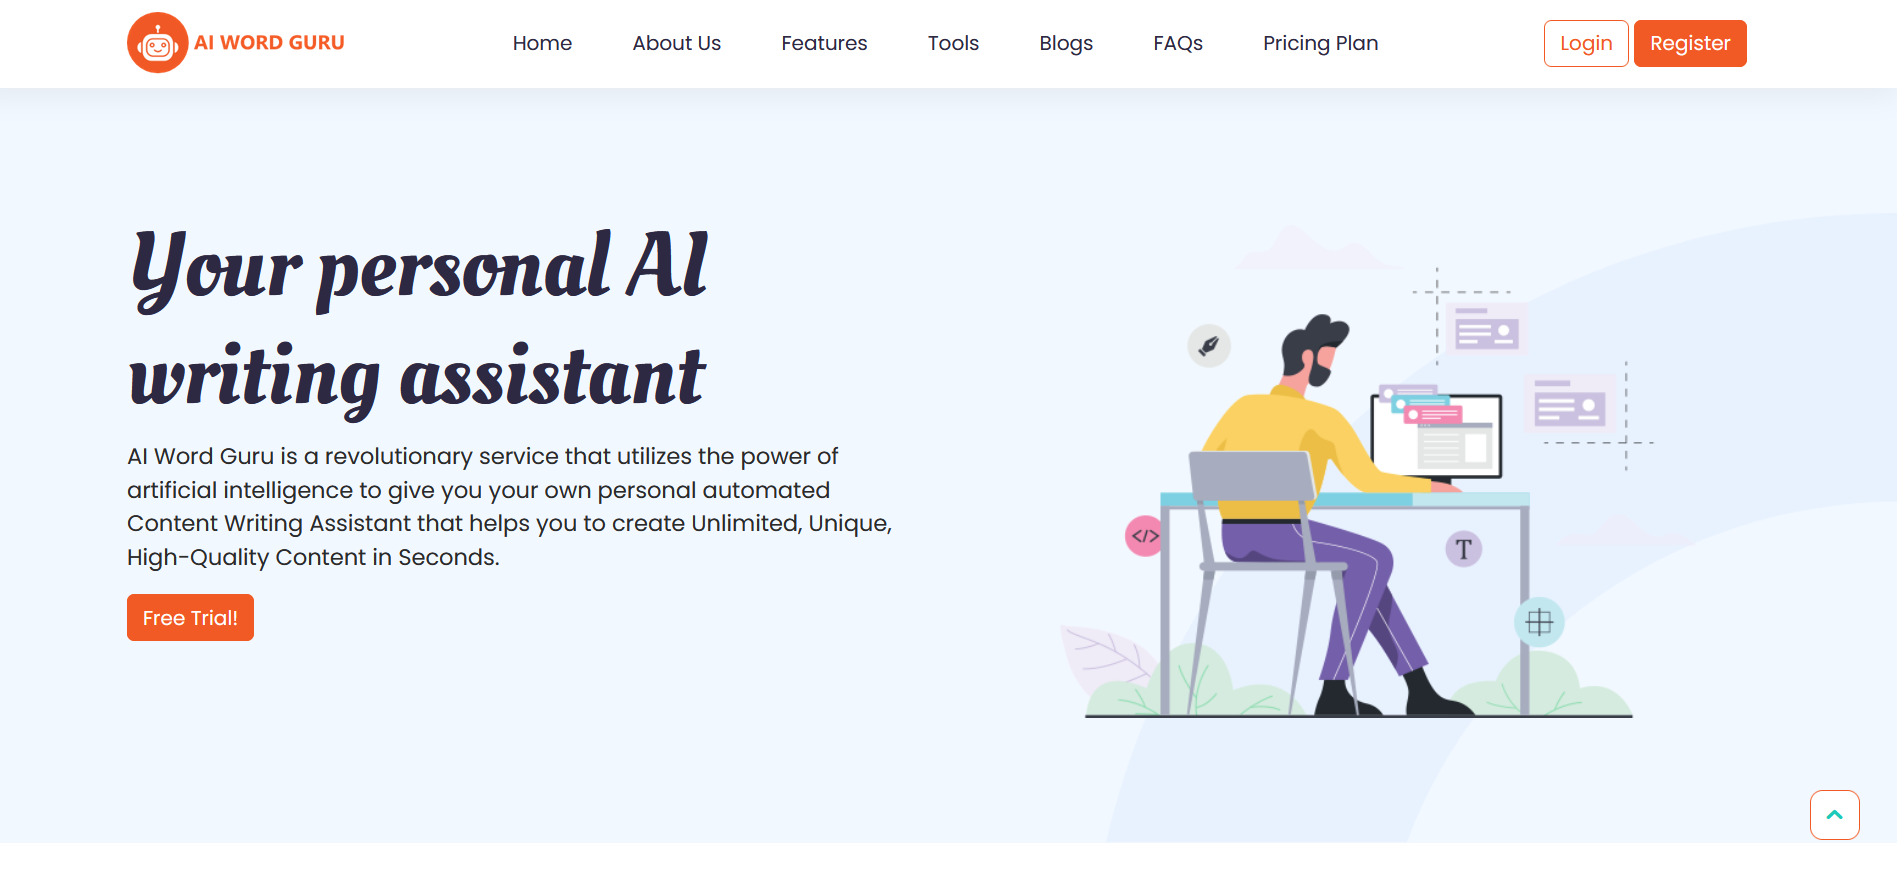 AI Word GuruPersonal AI writing assistant for enhanced productivity and